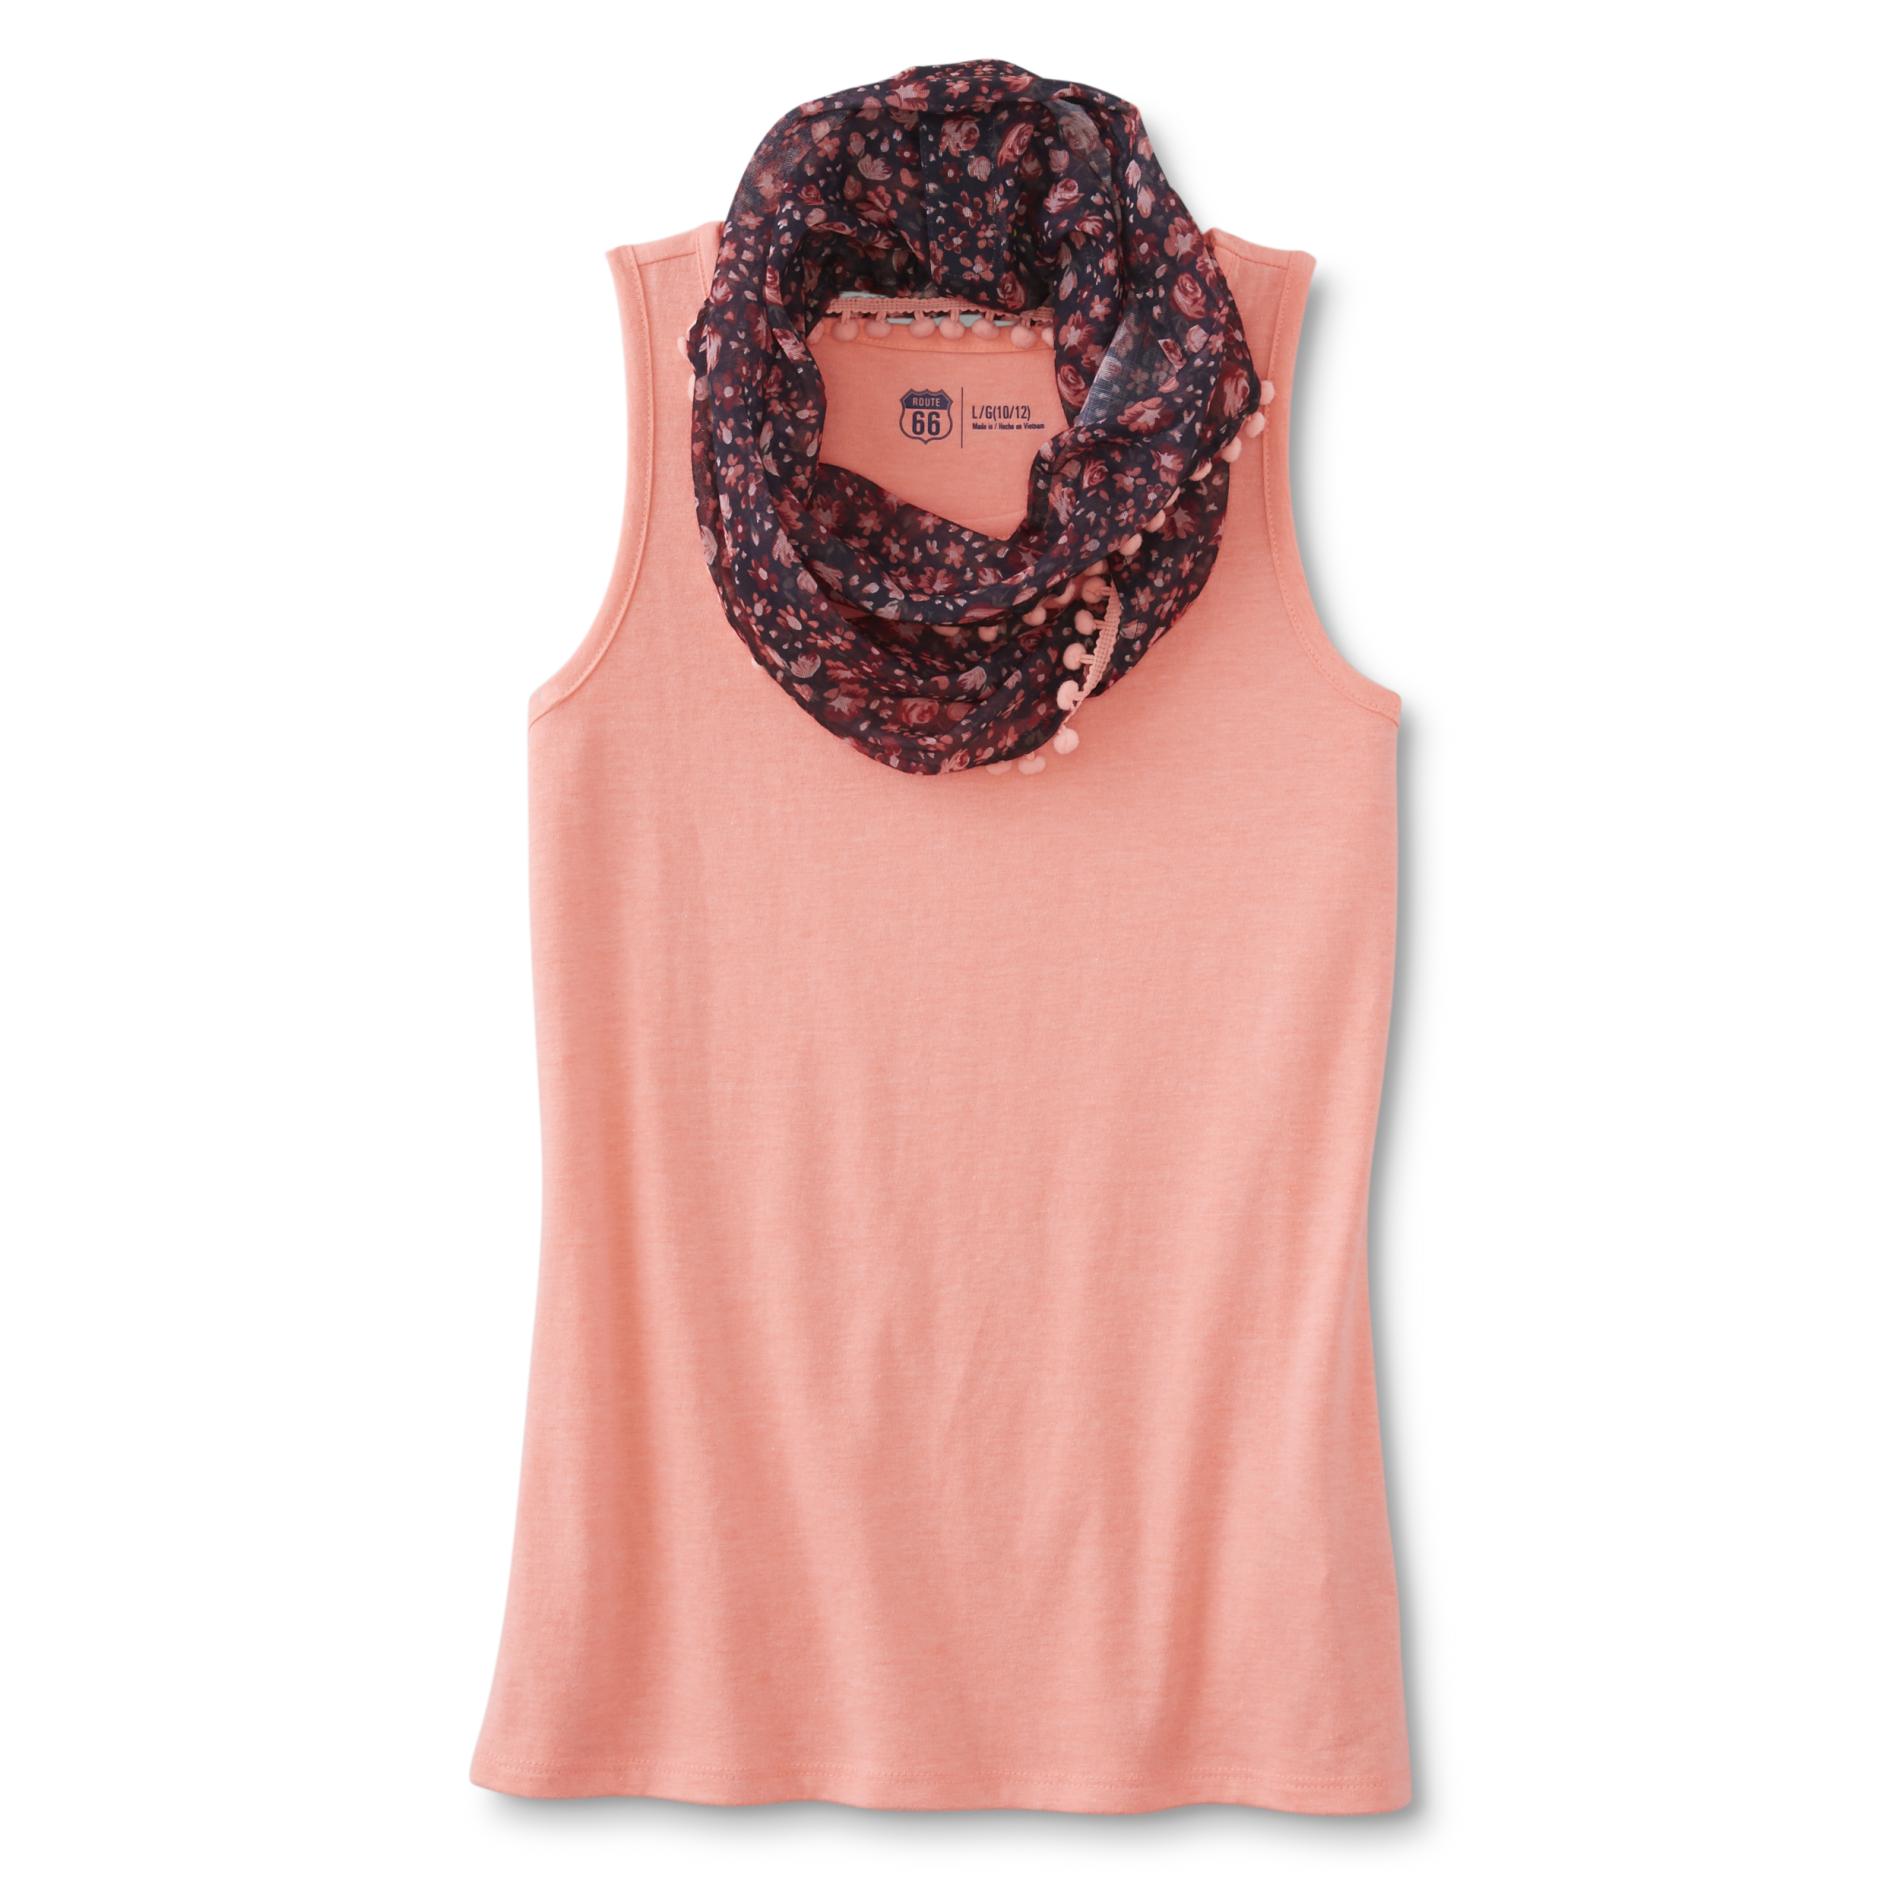 Route 66 Girls' Tank Top & Infinity Scarf - Floral